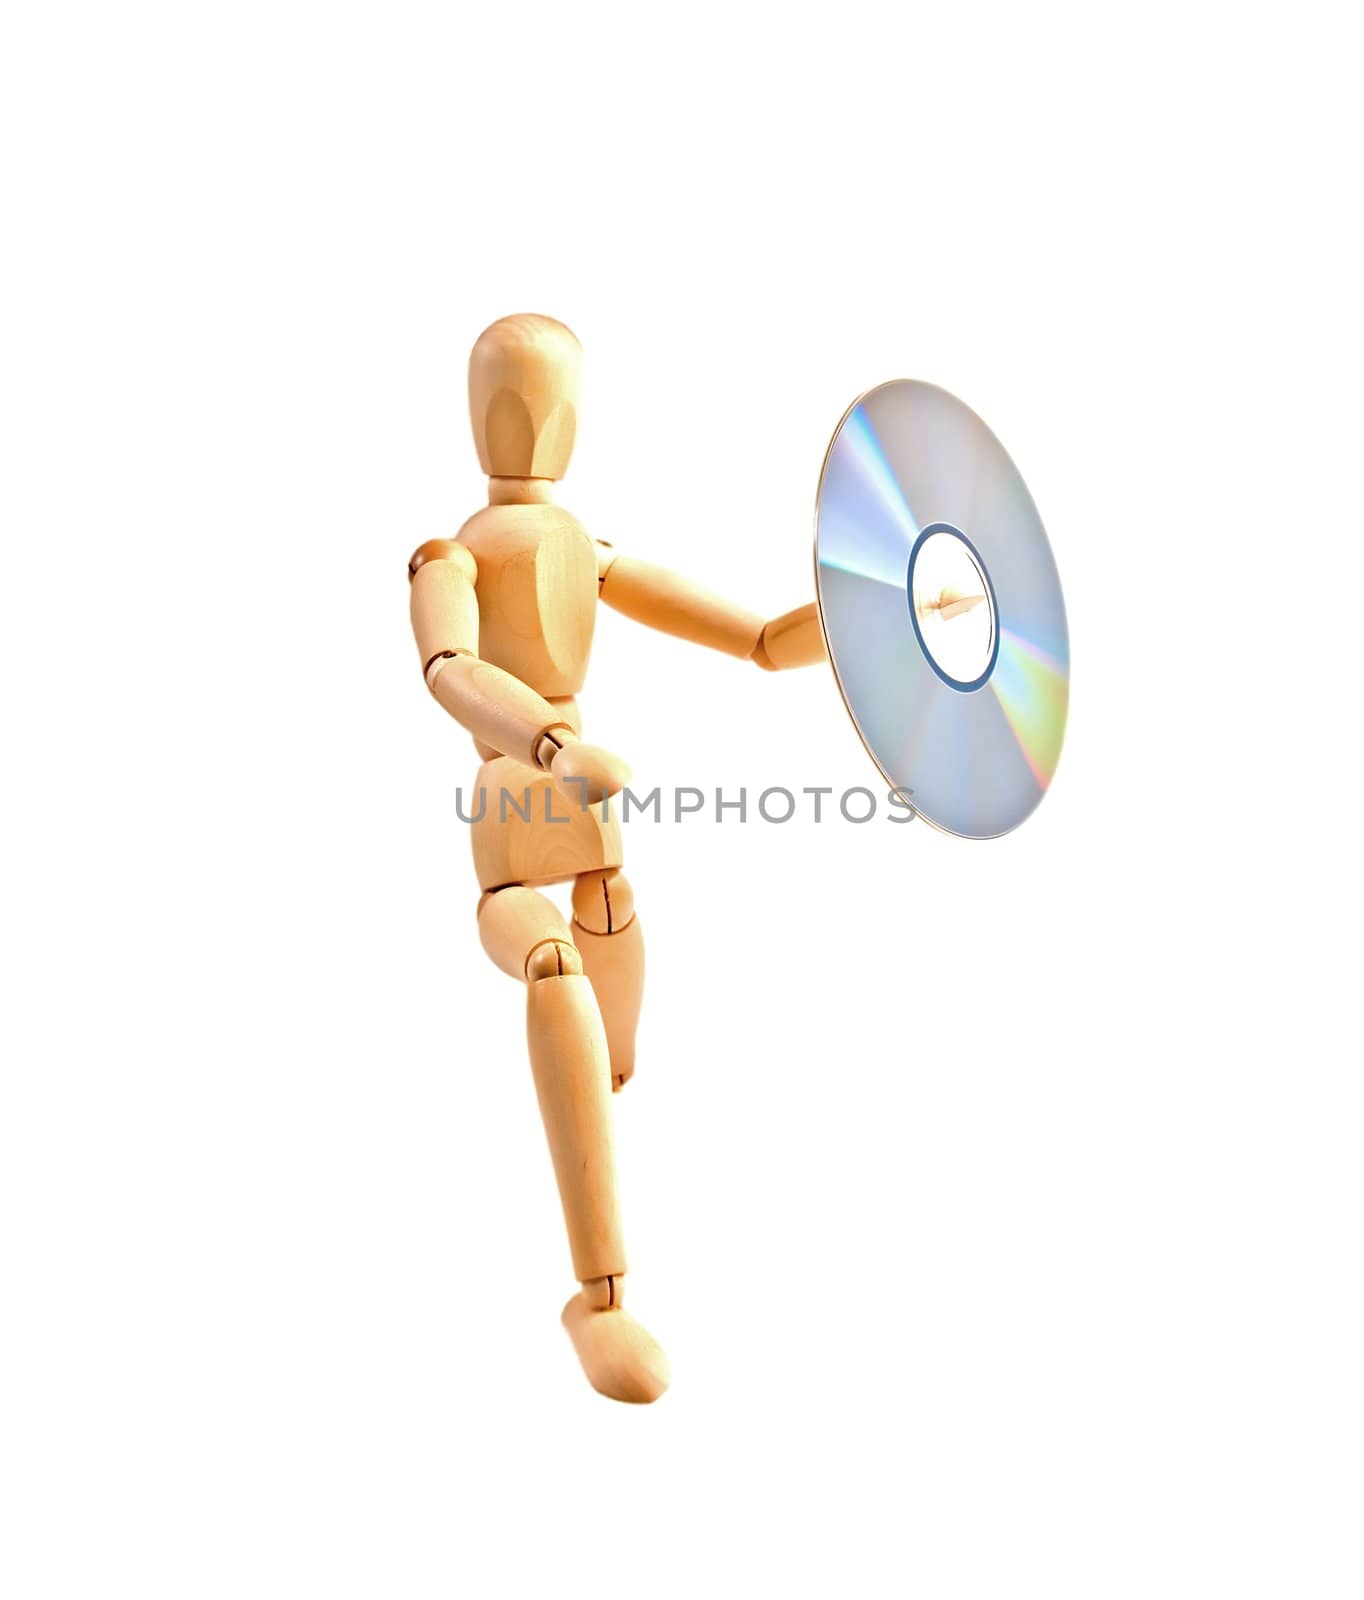 wood mannequin with CD-rom by keko64